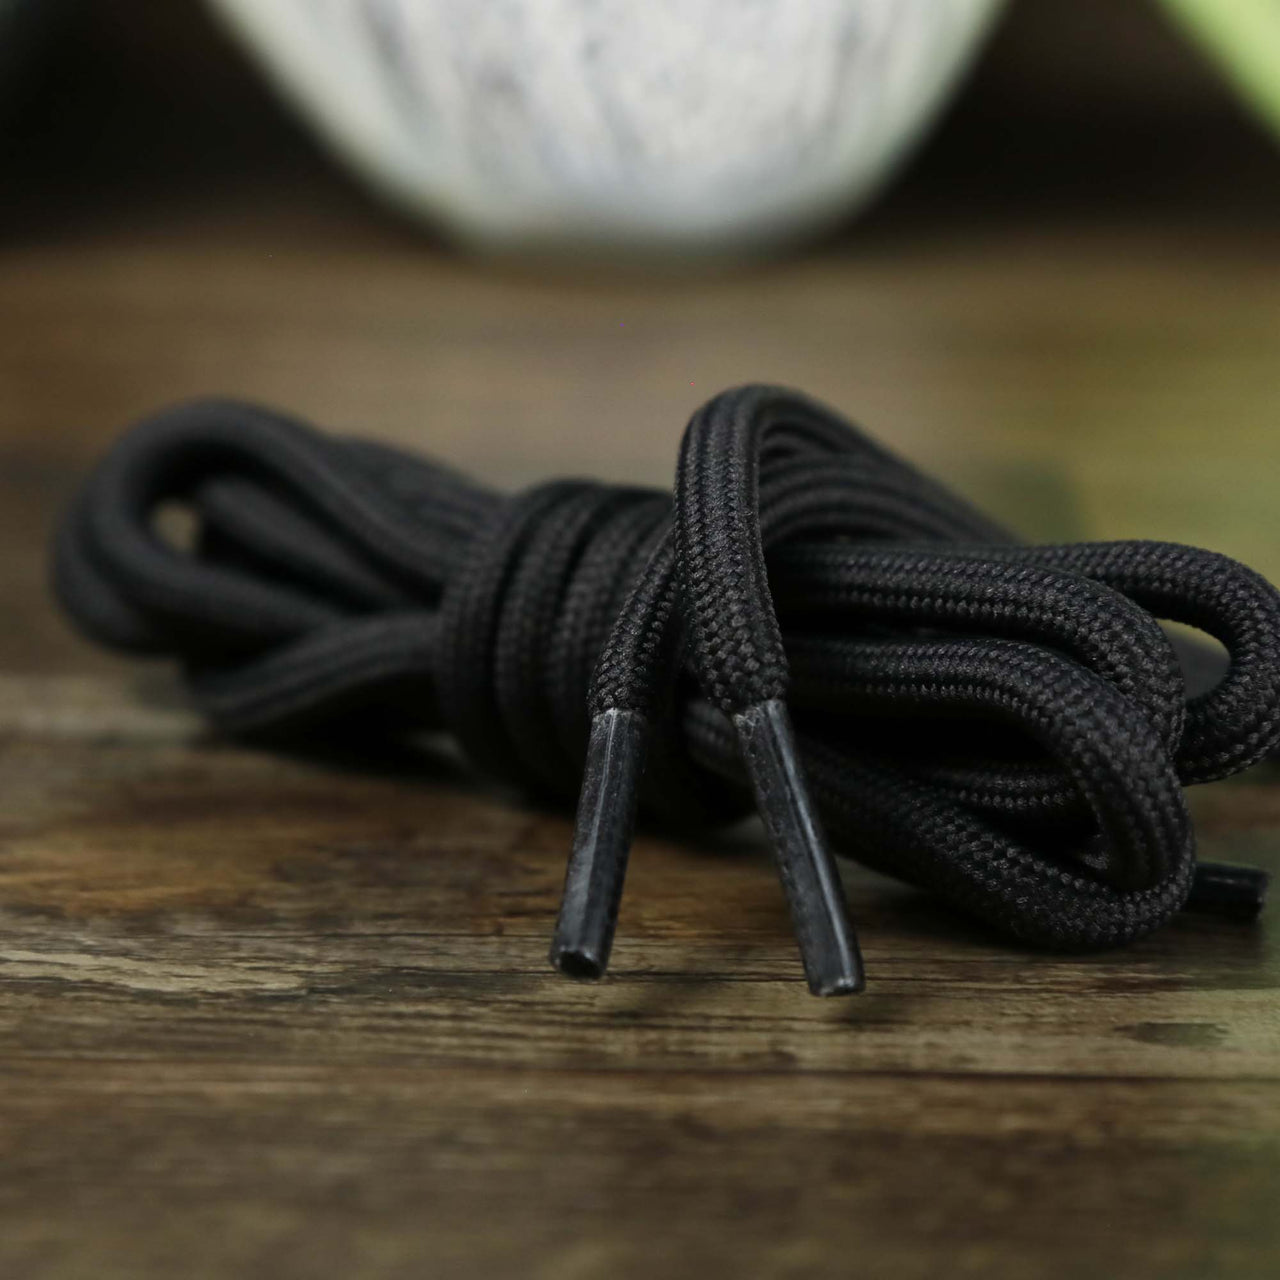 The Solid Rope Gunmetal Shoelaces with Gunmetal Aglets | 120cm Capswag